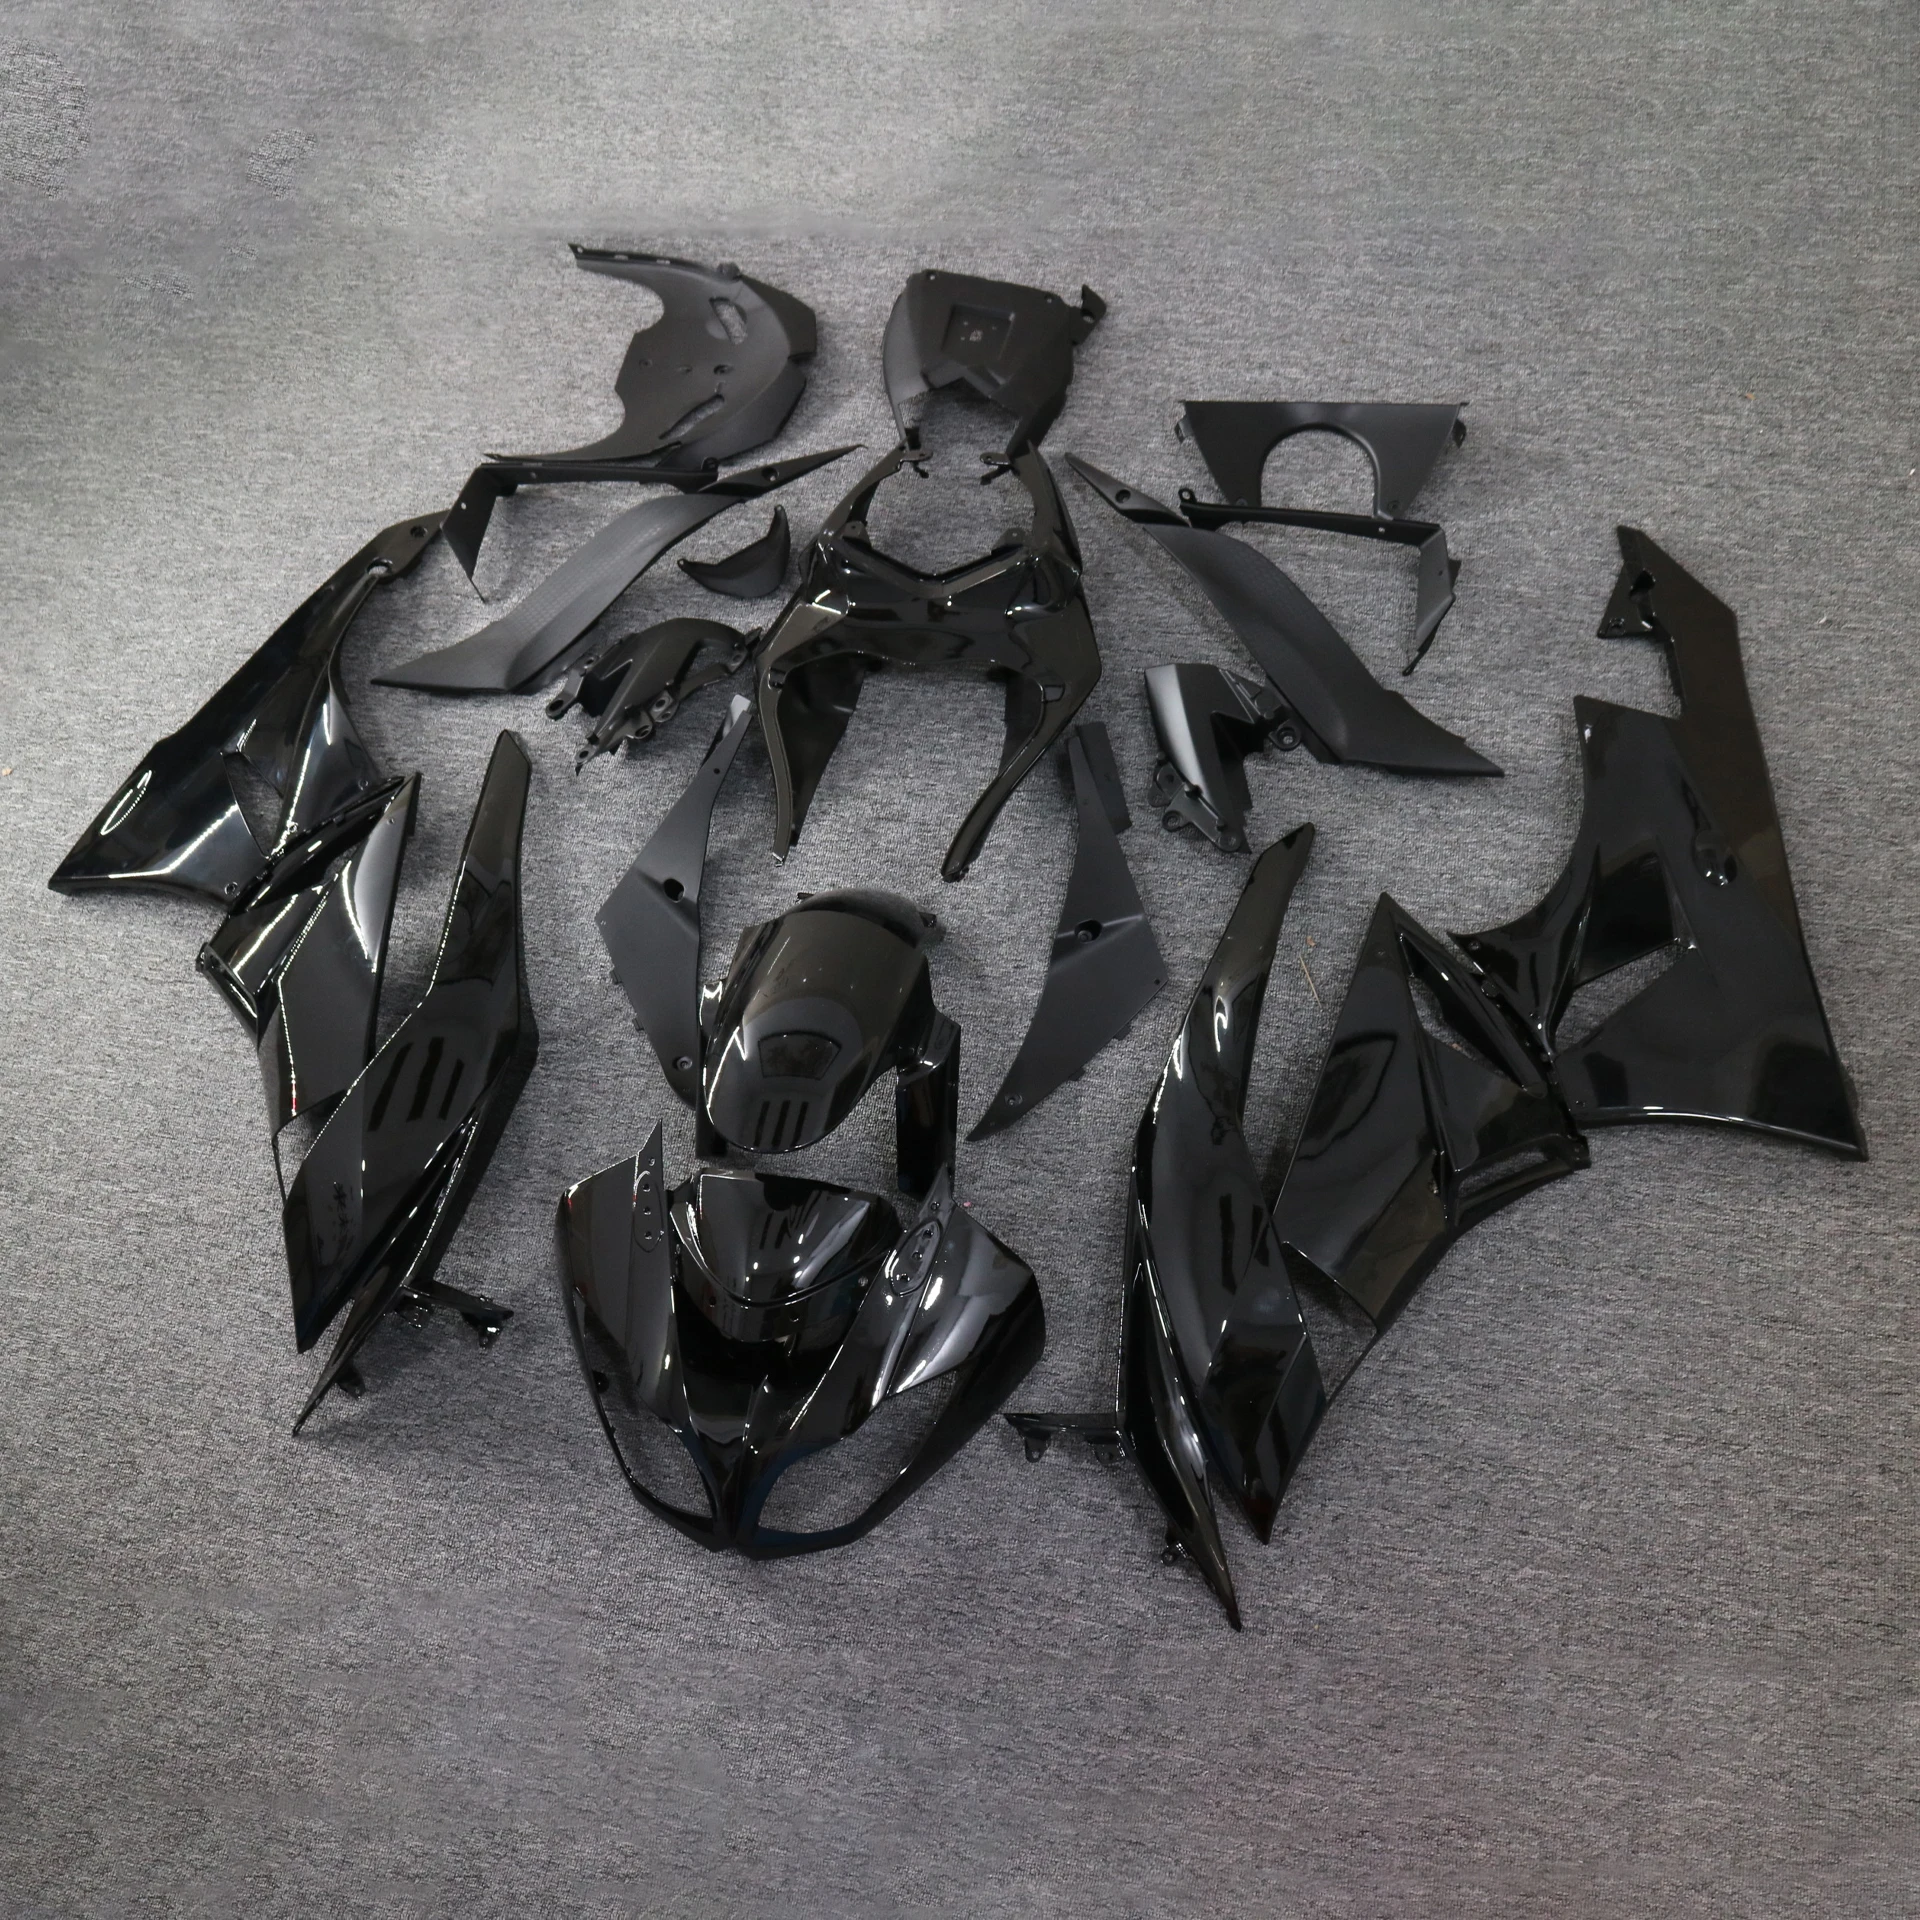 

For Kawasaki ZX-6R ZX636 ZX6R ZX 636 2009 2010 2011 2012 Motorcycle fairing body kit ABS injection molding